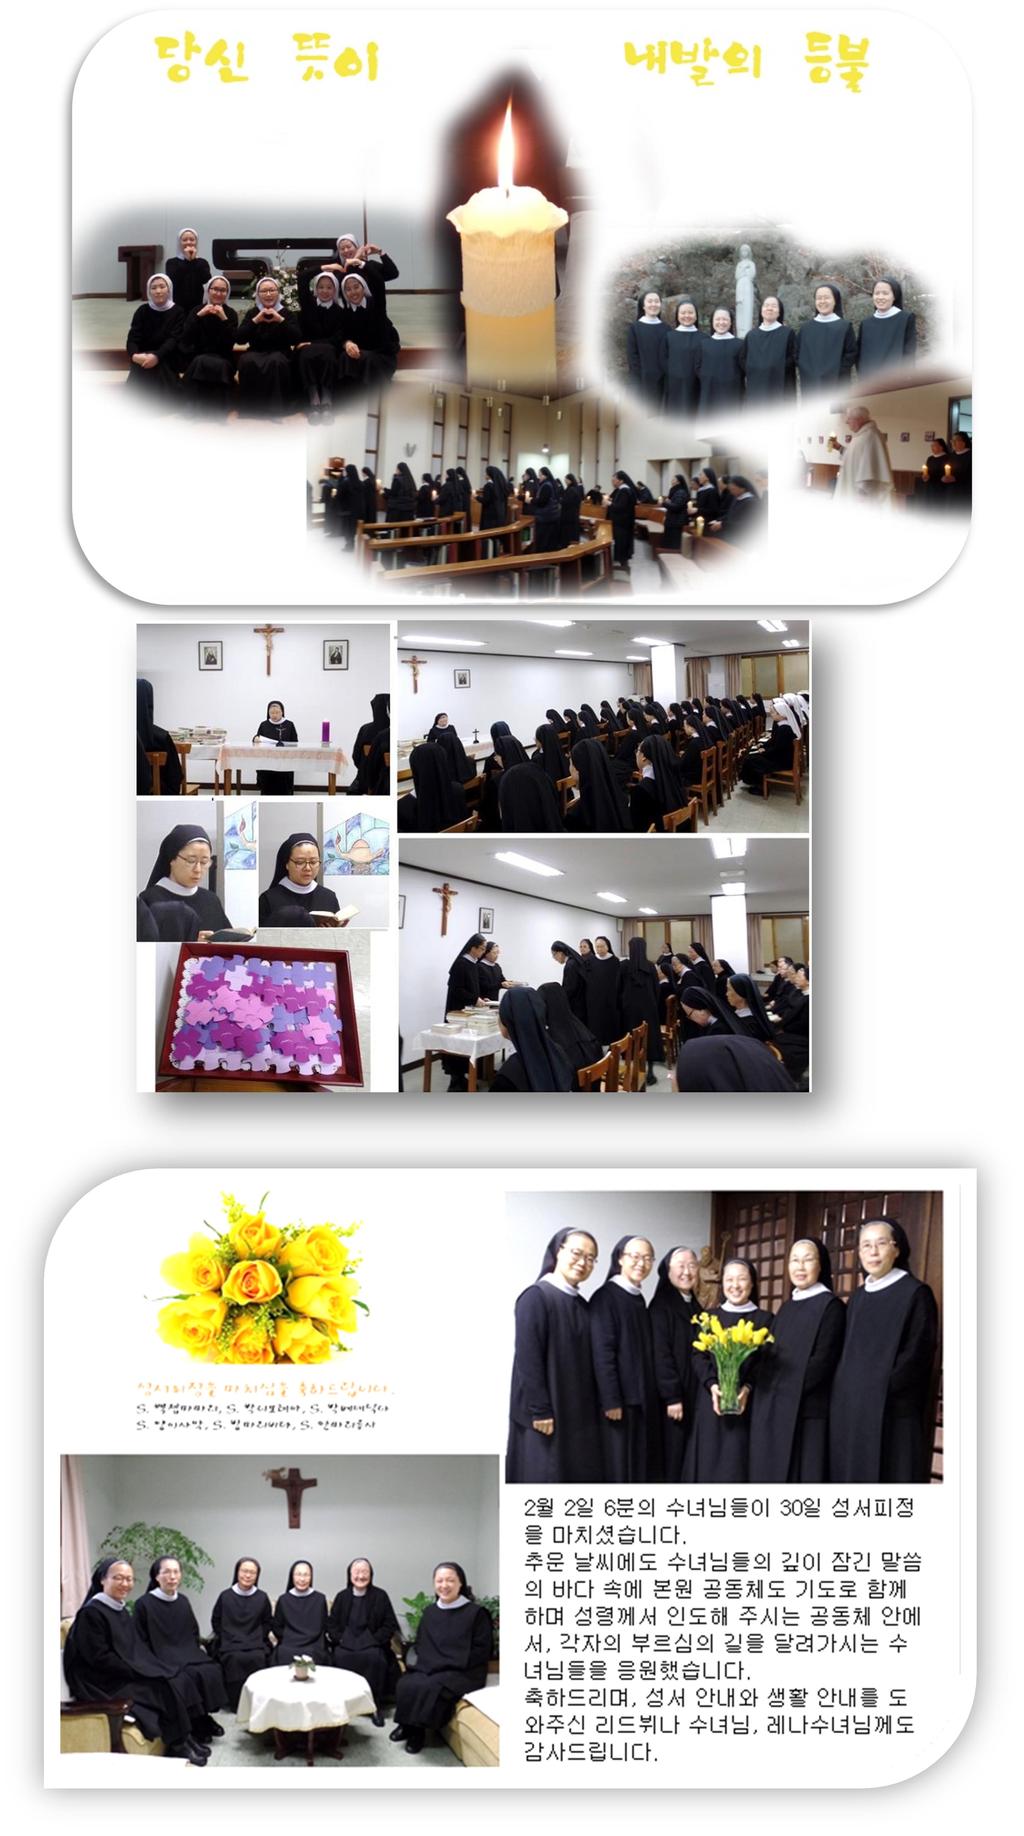 The beginning of February The feastday of presentation of the Lord Novitiate posed and Junior sisters before their status changes coming soon, that is on the feast of St. Scholastica.